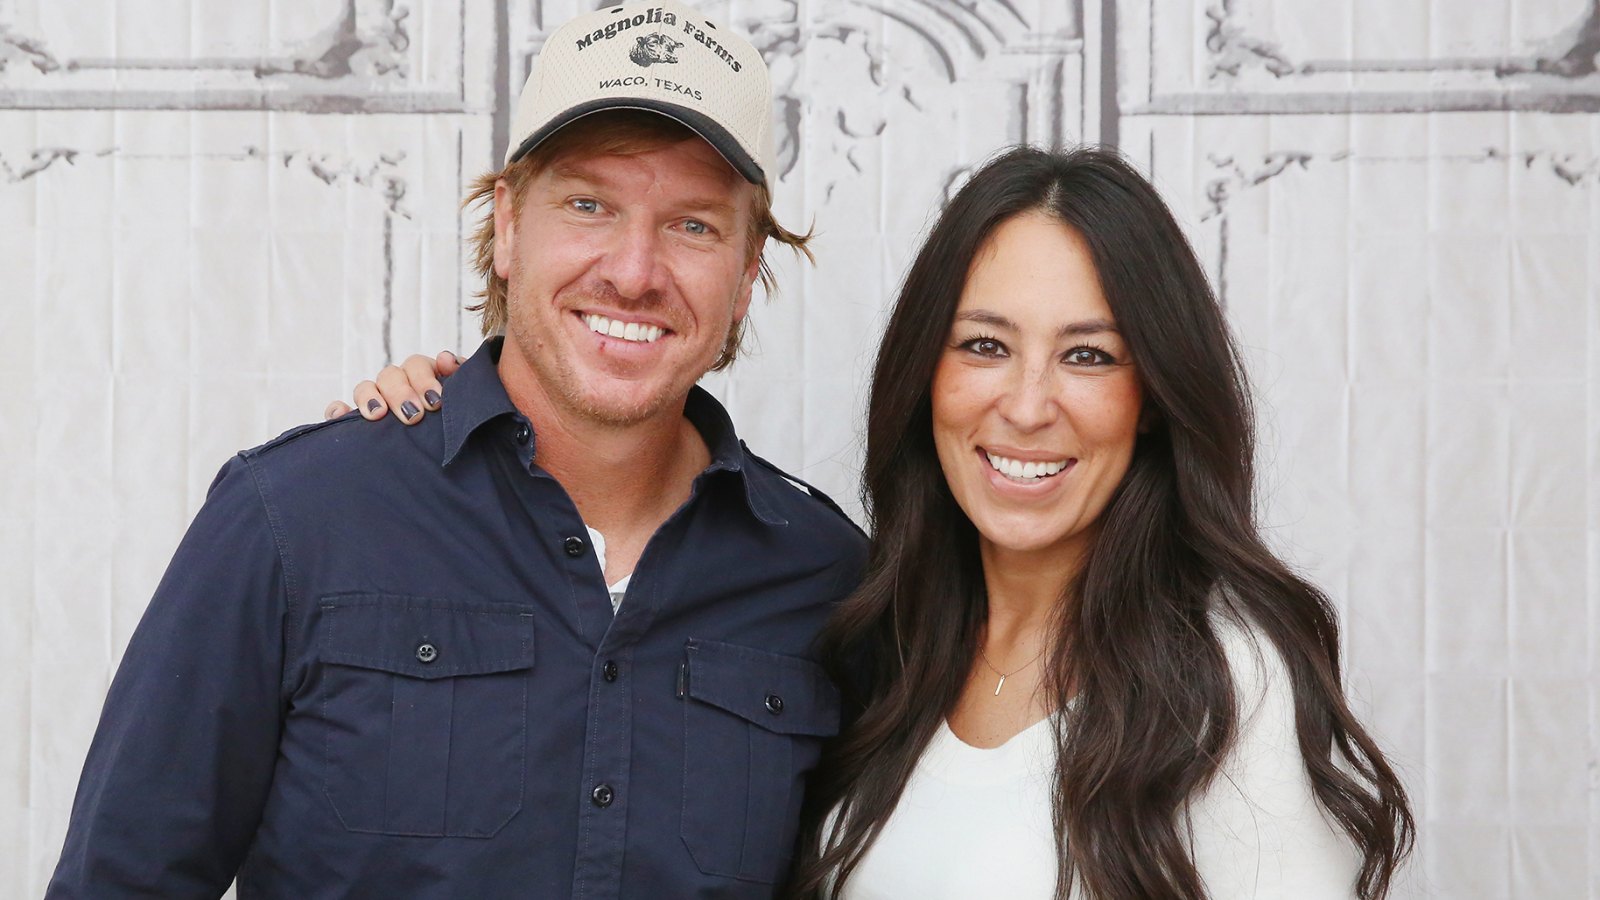 Chip Gaines and Joanna Gaines last episode